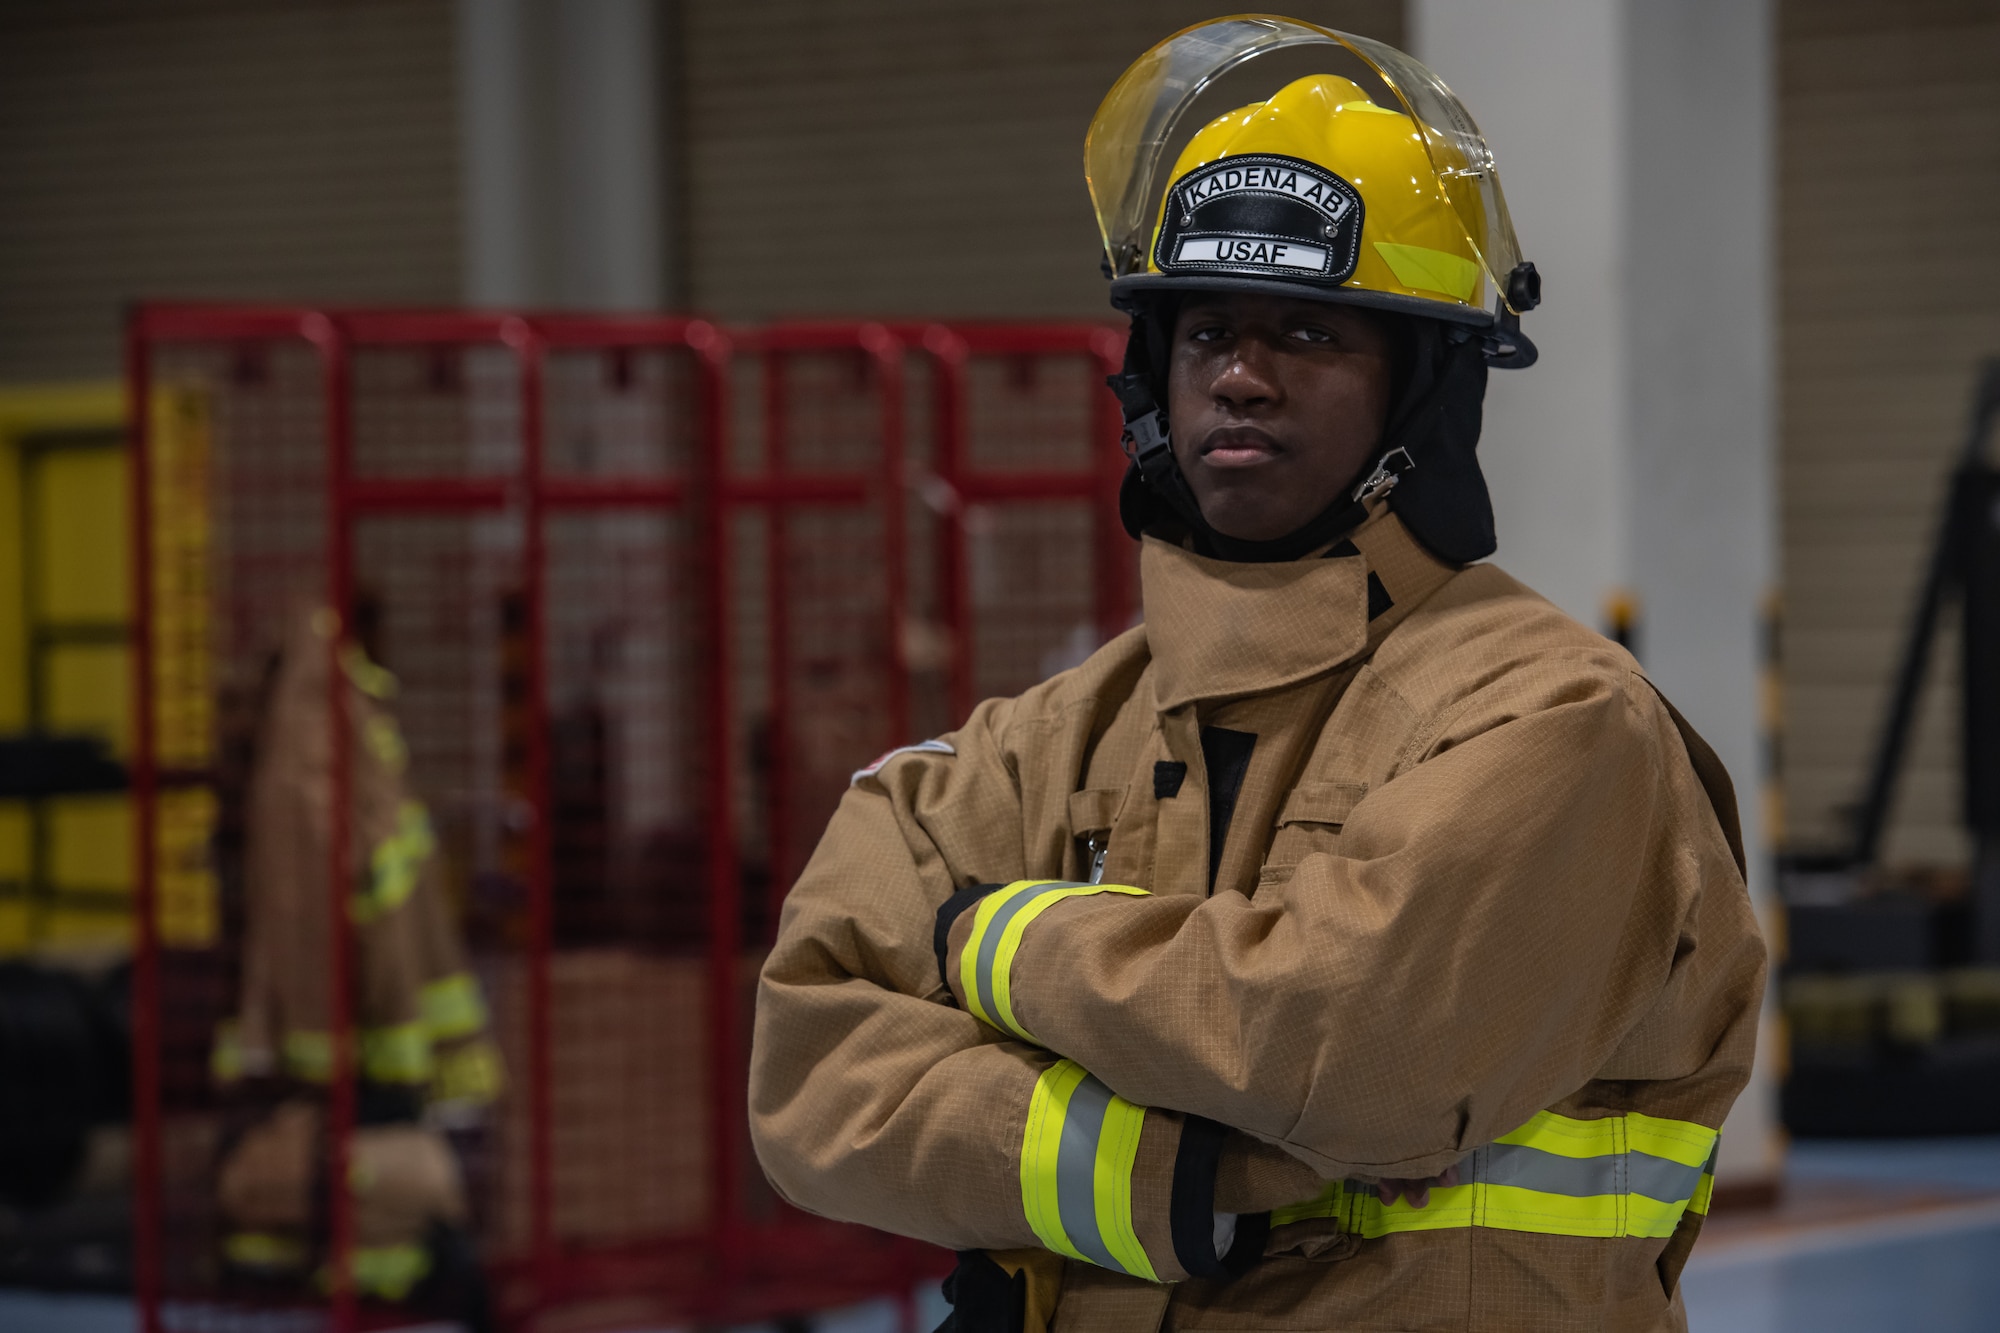 An Airman standing in bunker gear in the bay of a fire station.